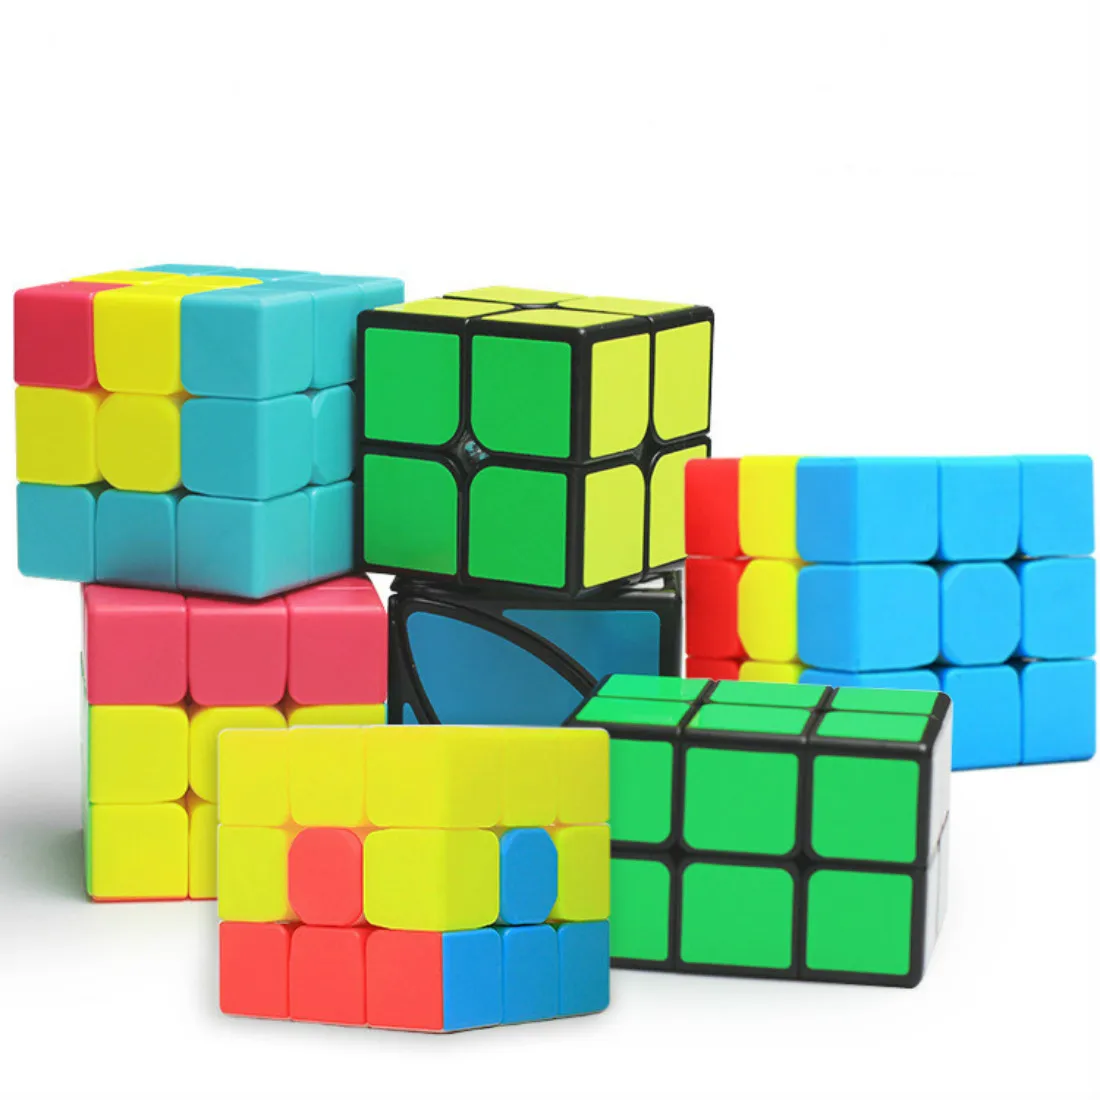 

Zcube Strange Shape Colorful Cube Sandwich Caterpillar Concave Cube Pudding Plastic Cubo Magico Stickerless Educational Toys